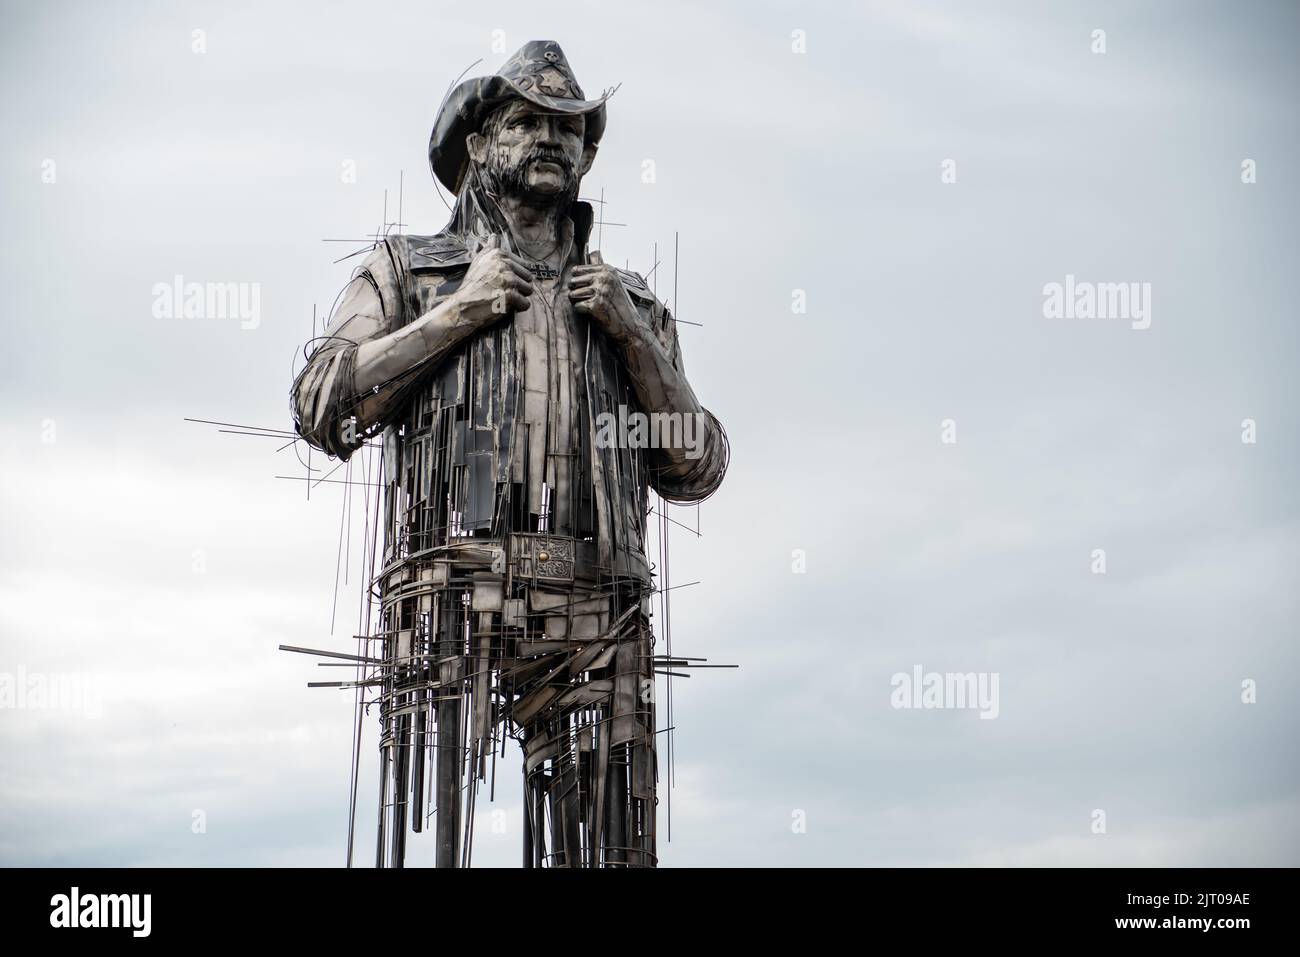 The statue in memory of Ian 'Lemmy' Kilmister of Motörhead unveiled in 2022 at the Hellfest Open Air festival Stock Photo